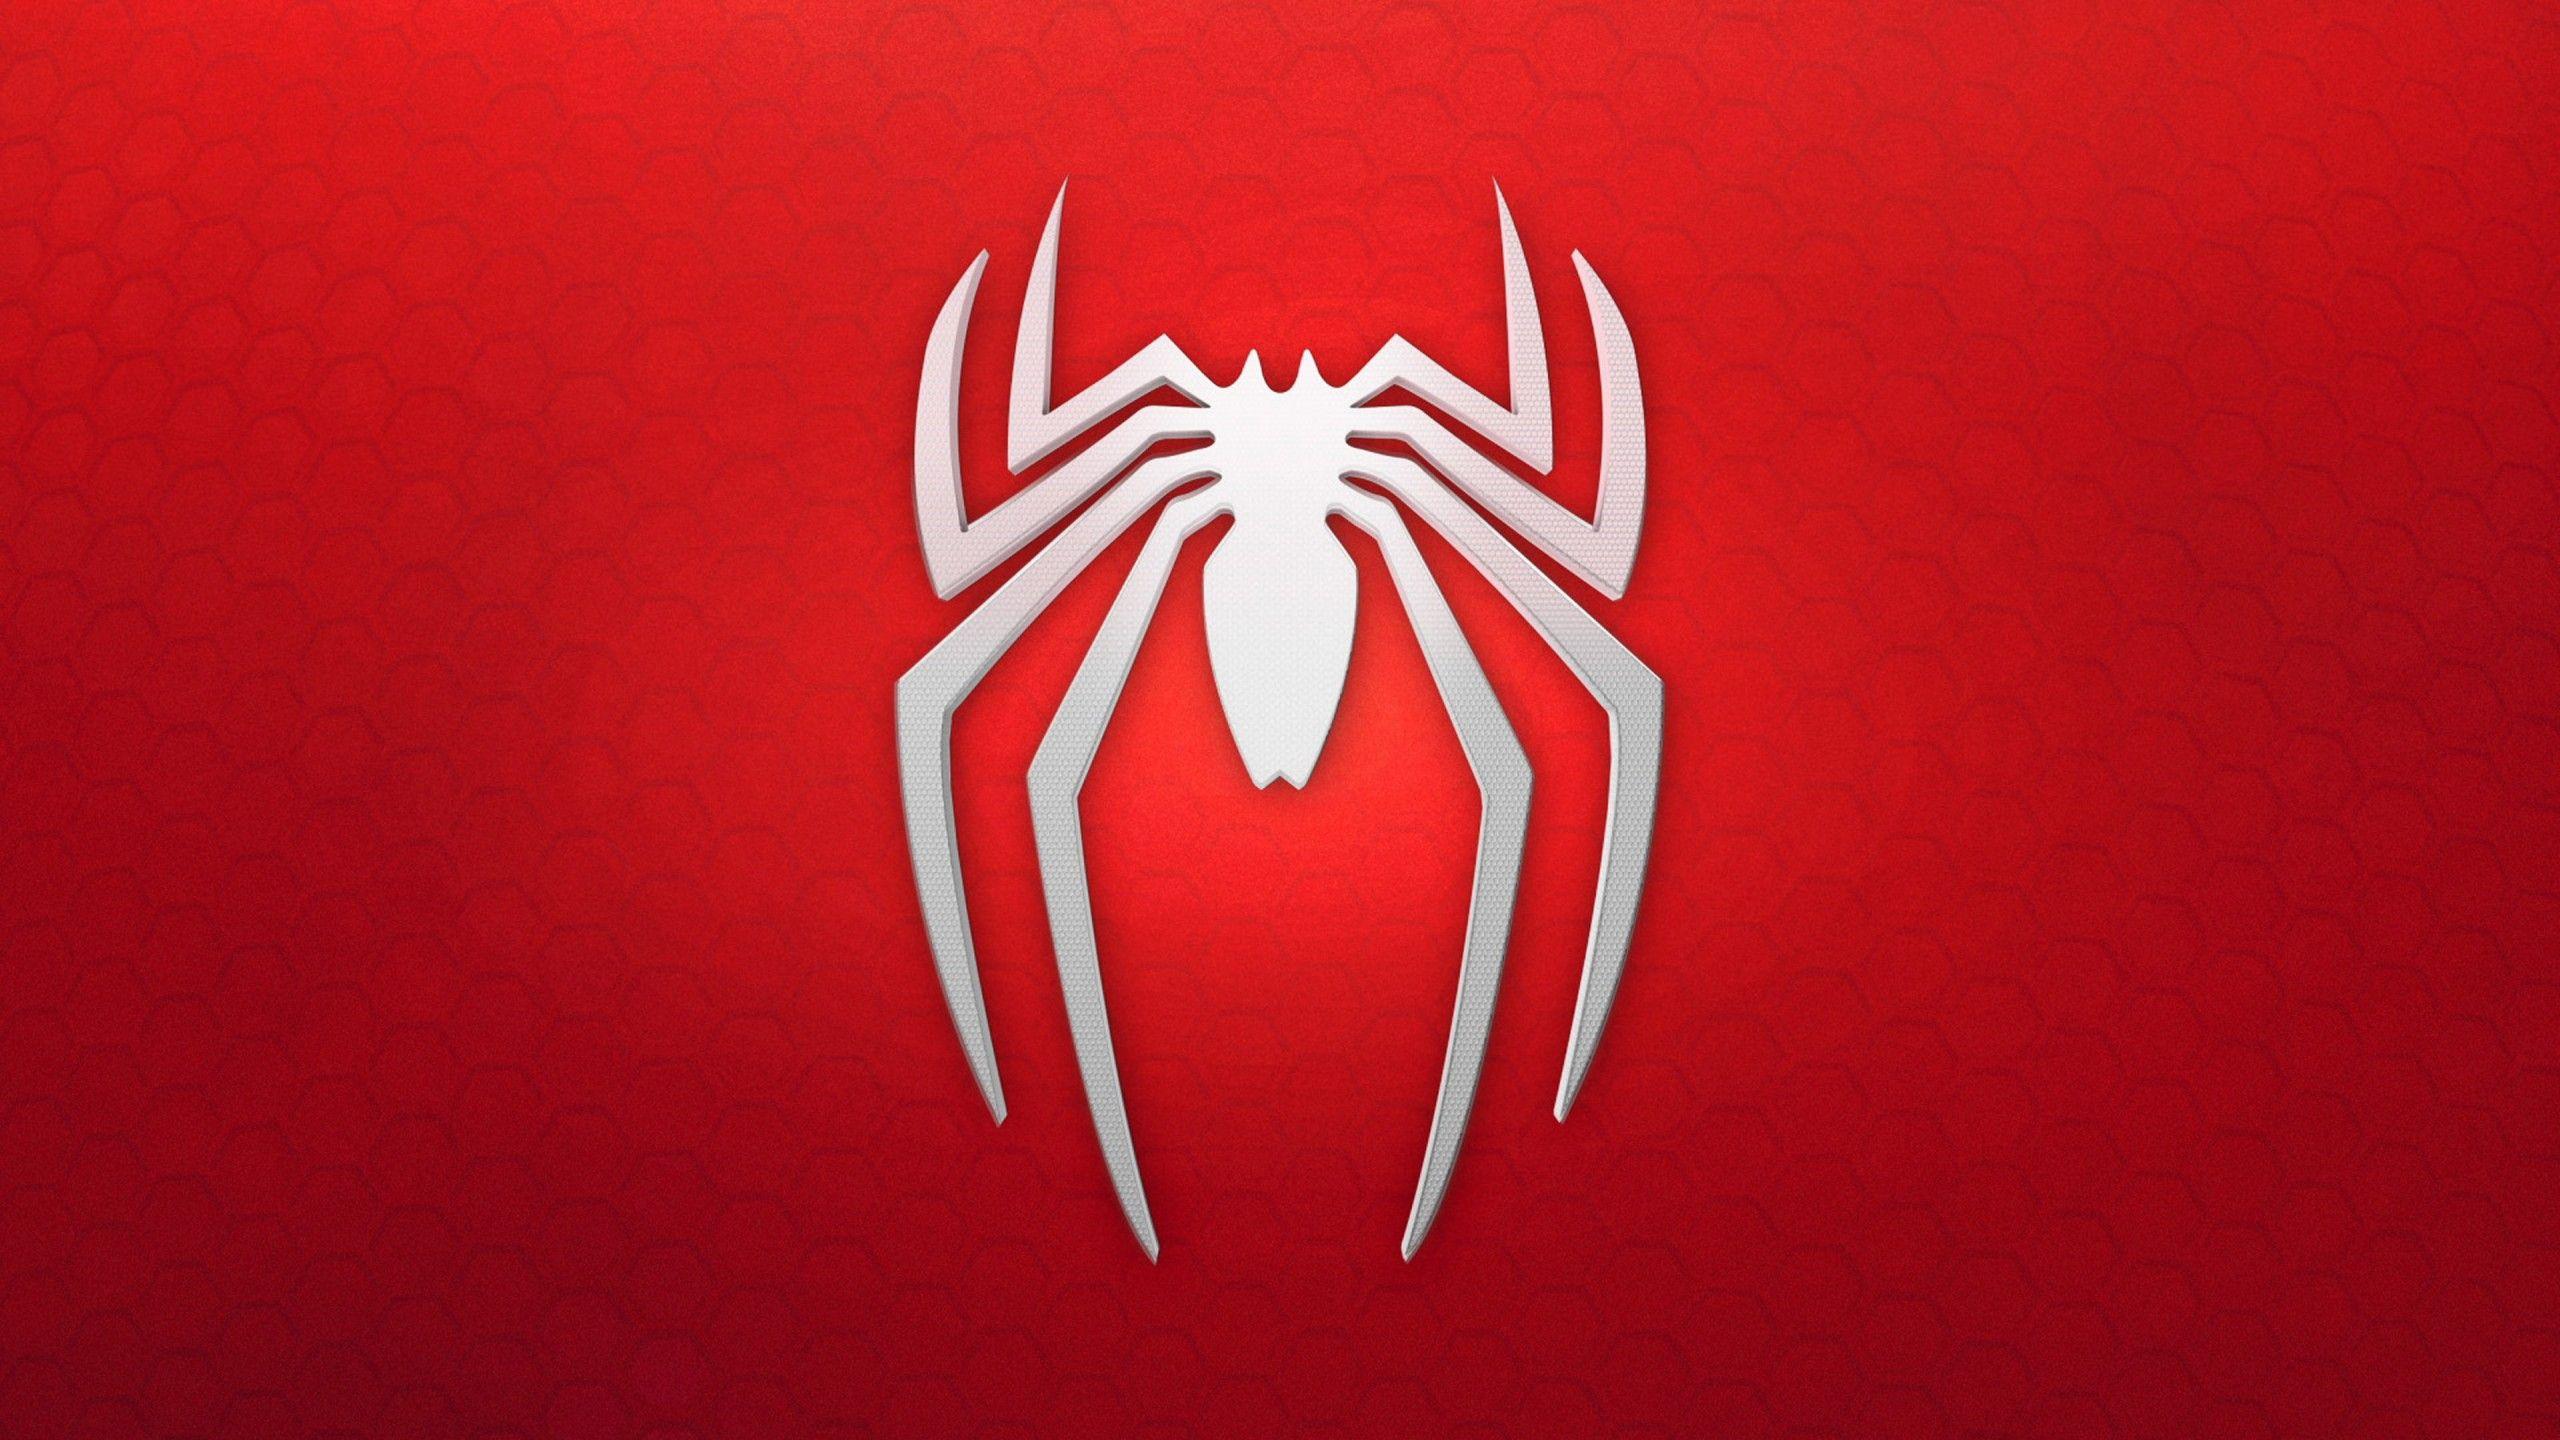 Red White and Animal Logo - Wallpaper spiderman, logo, background, red, white, Games